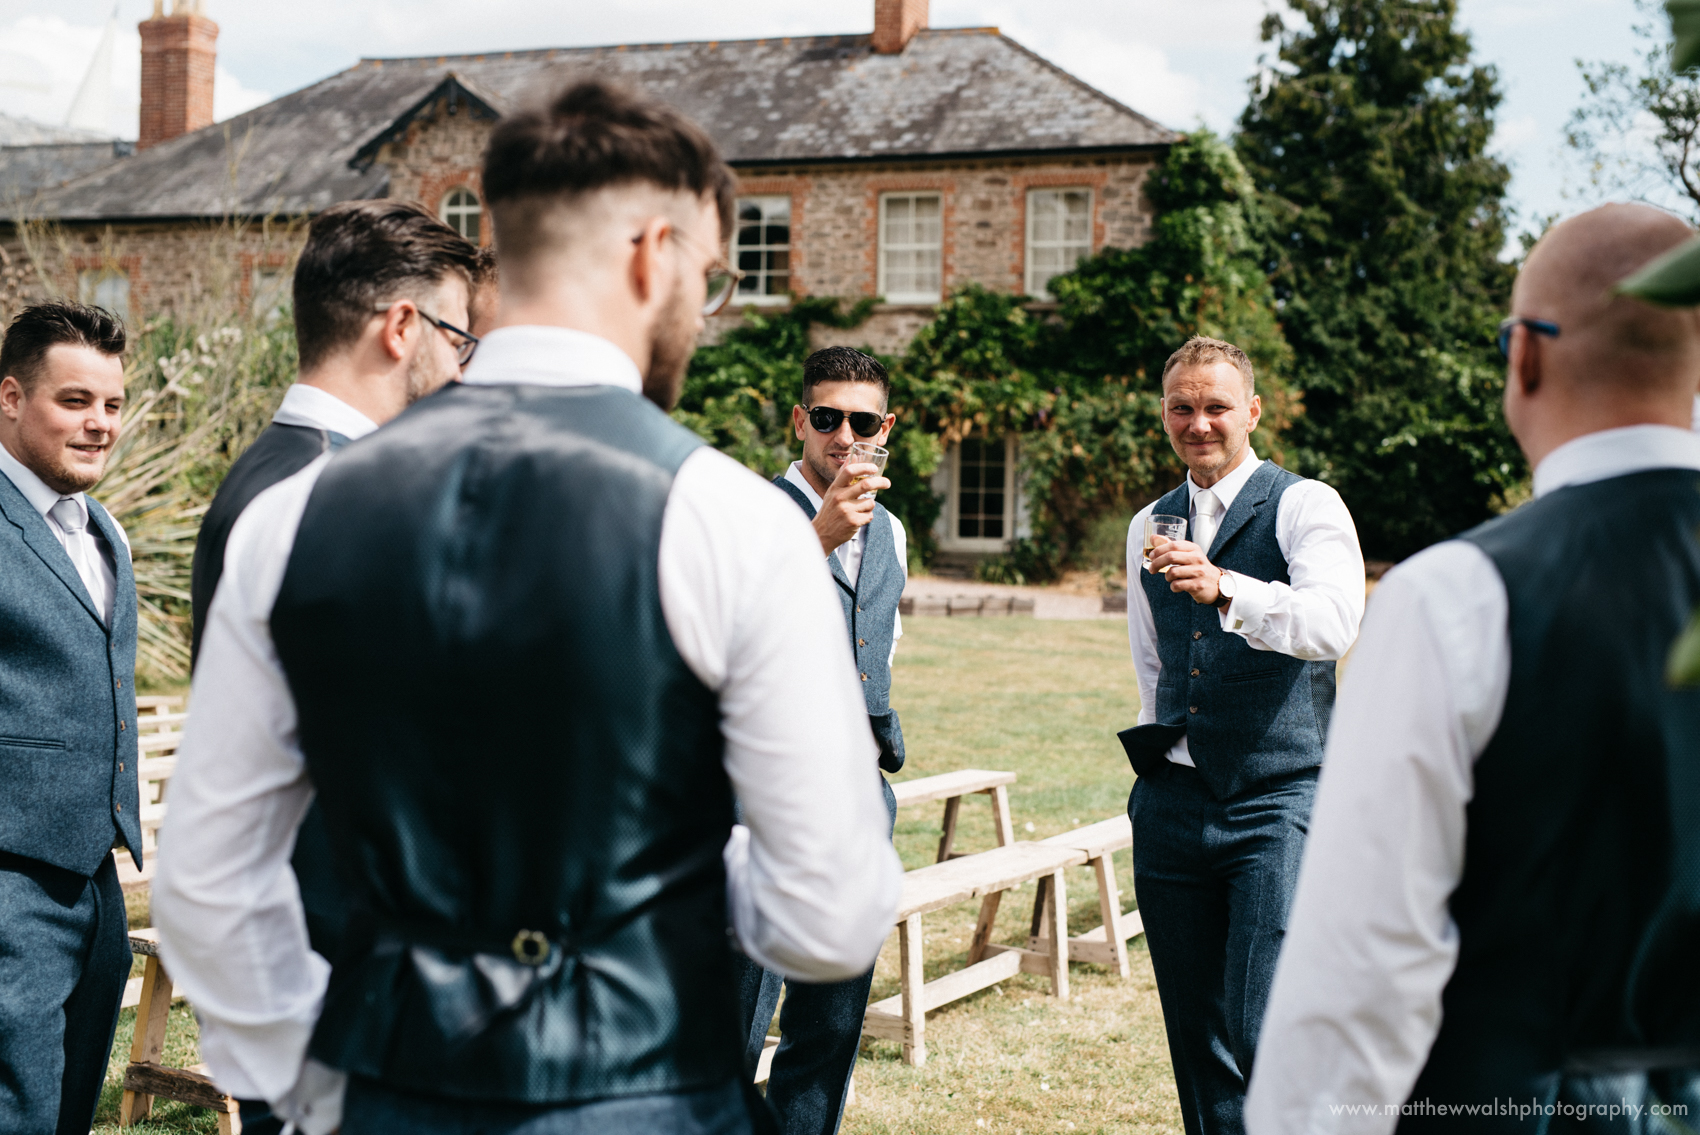 Groomsmen having a little pre ceremony banter with the groom